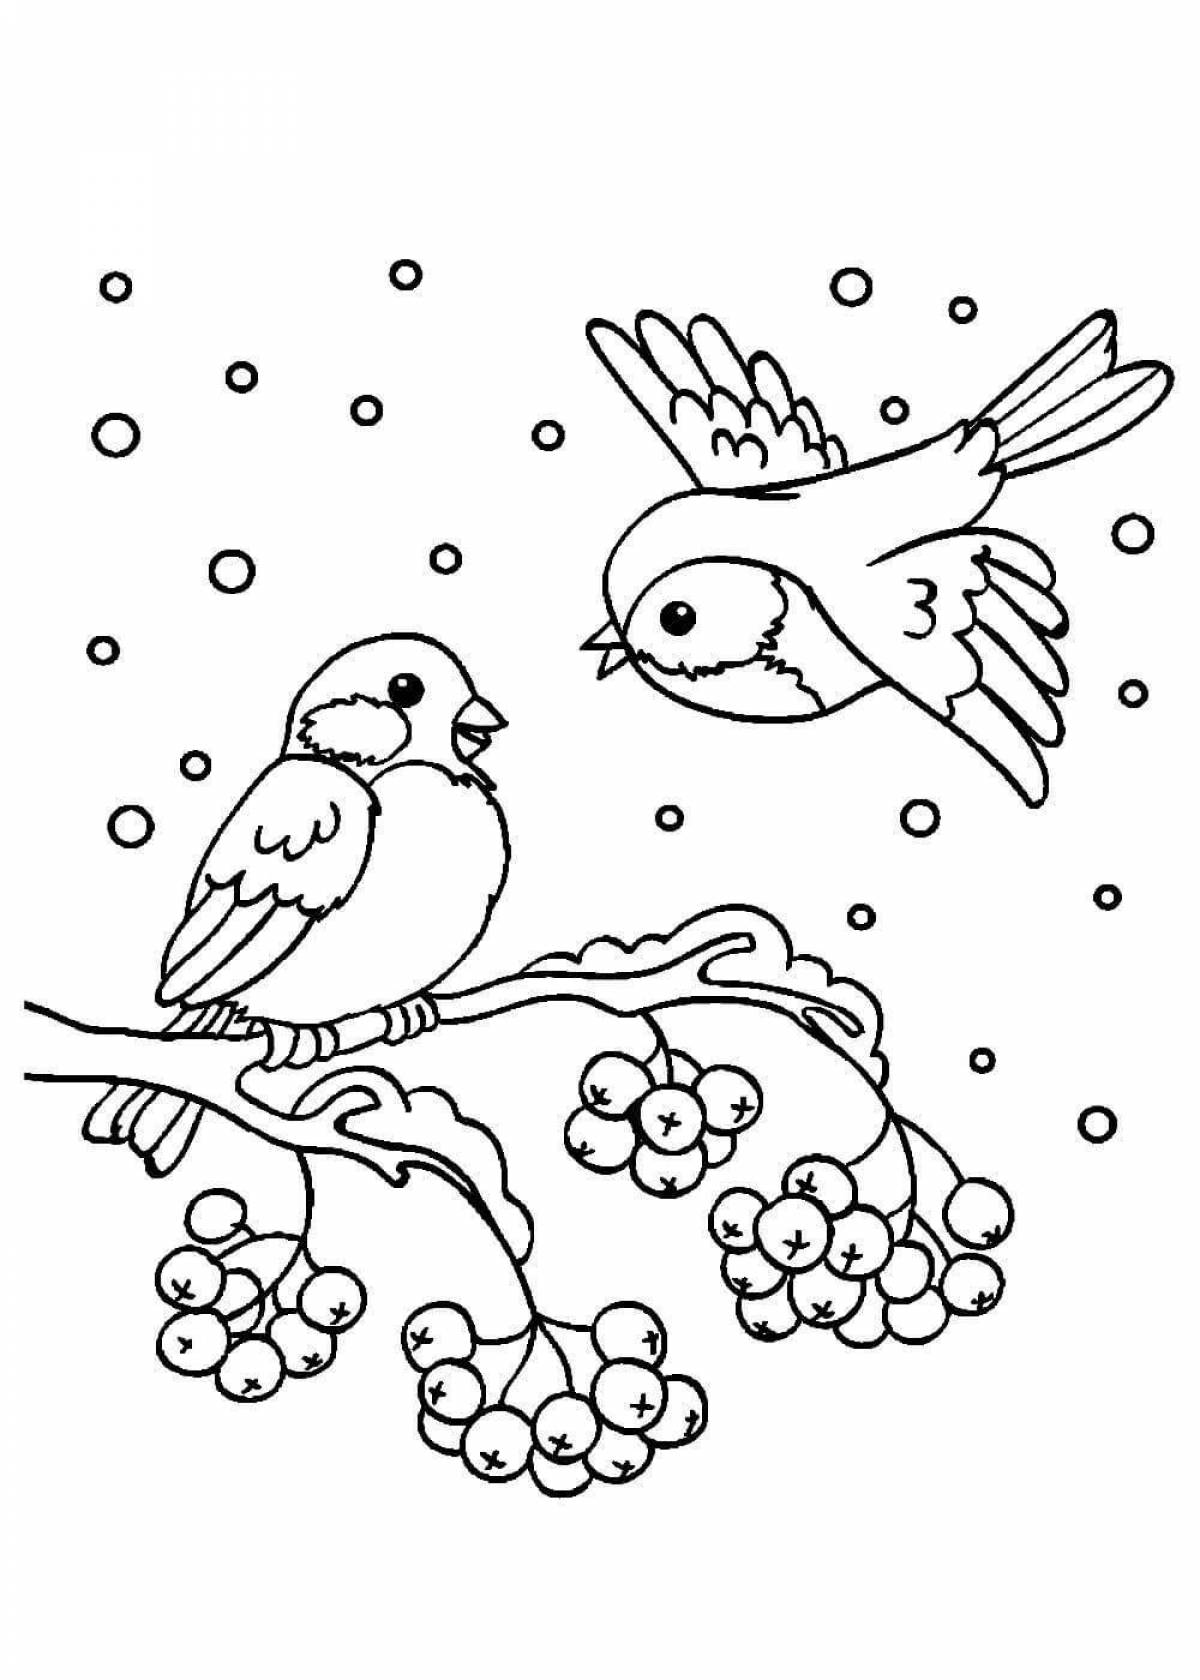 Adorable tit coloring book for children 6-7 years old